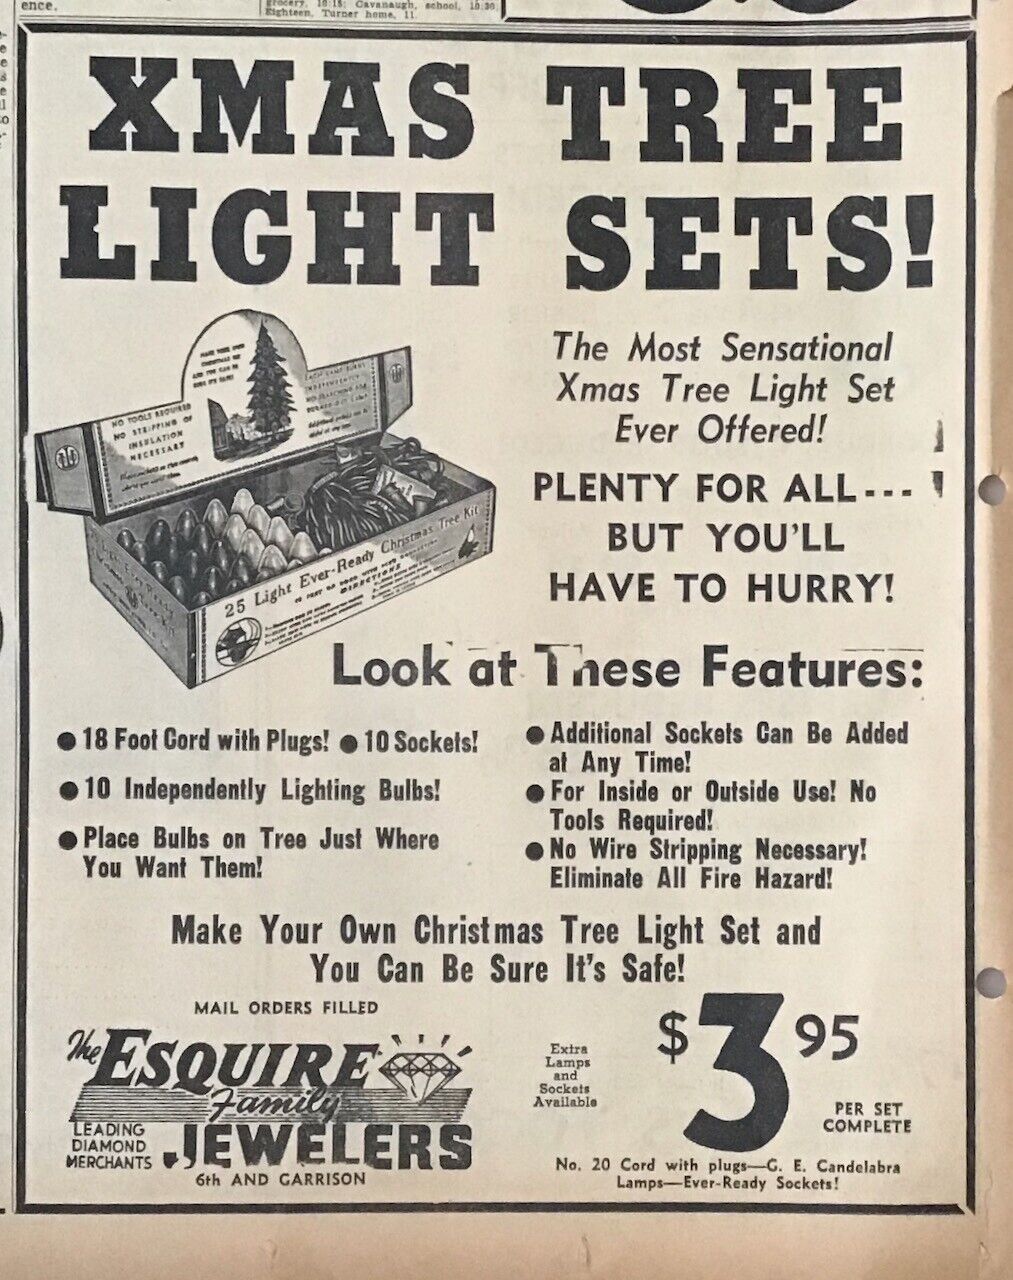 1948 newspaper ad for Christmas Lights - Most Sensational Ever Offered features